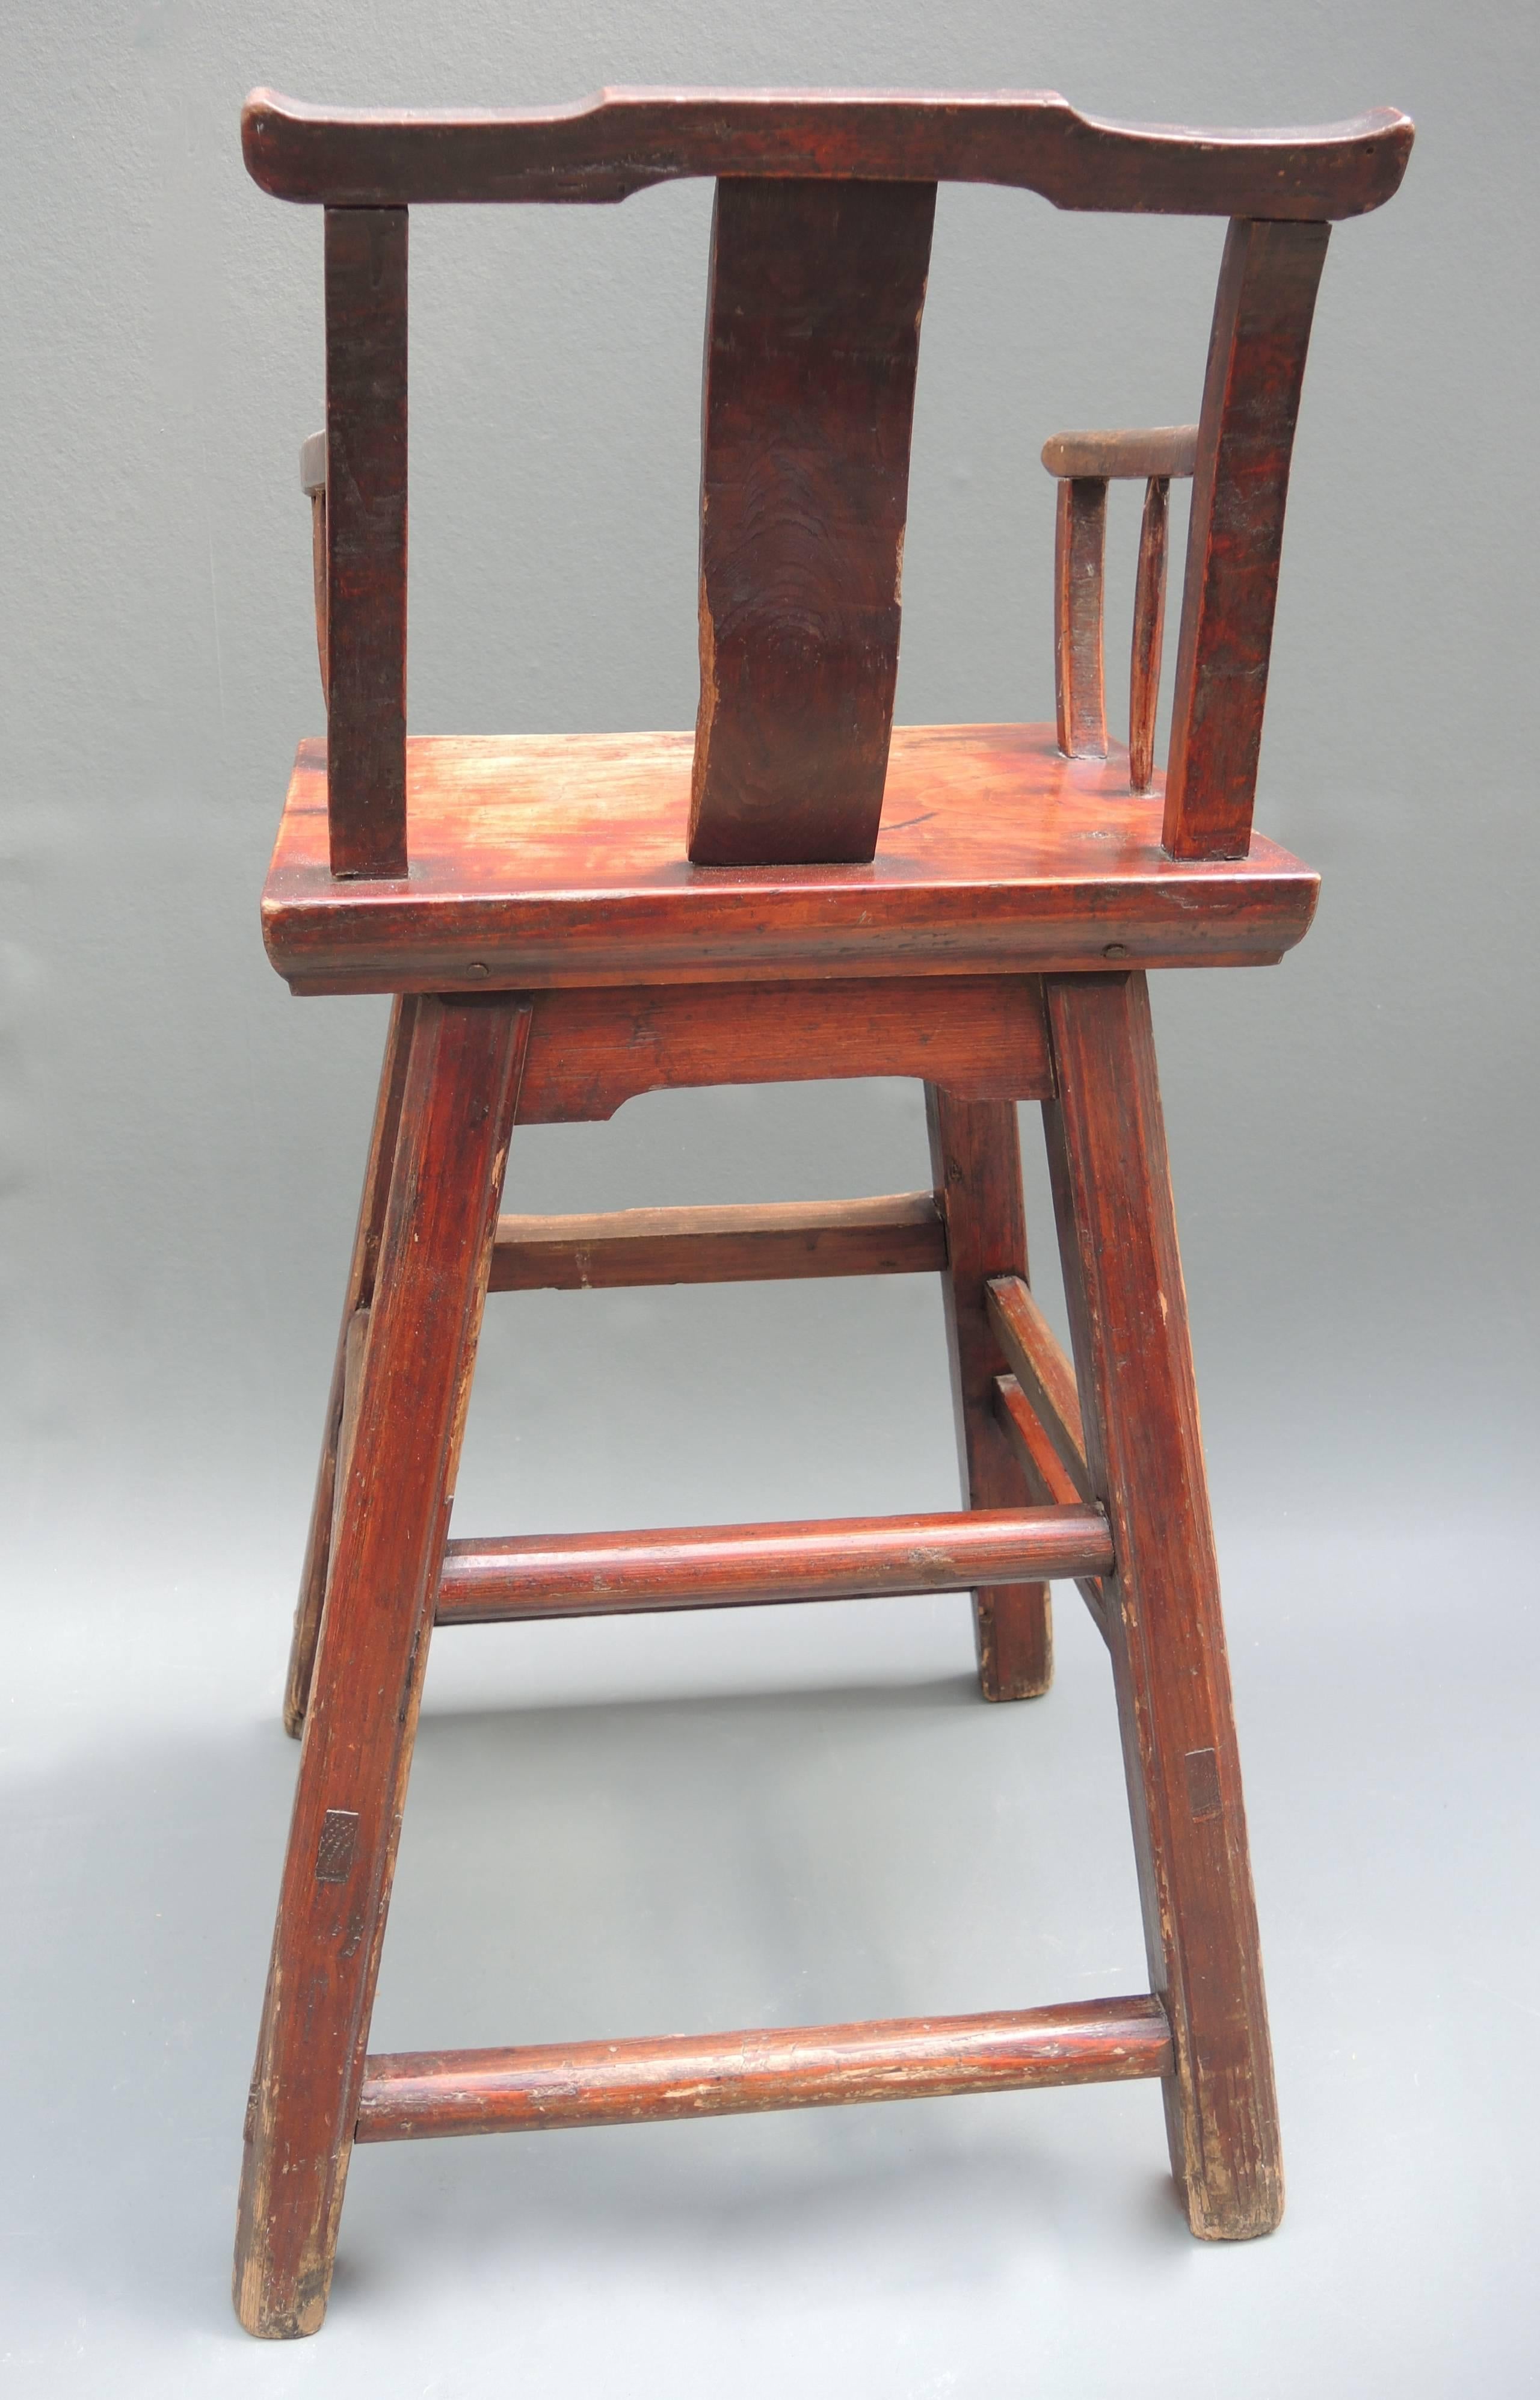 This Chinese childs high chair is from the mid-19th century Qing Dynasty.
All peg and tenon wood construction with no nails or screws. Can be used on a daily basis as a high chair or enjoyed for its sculptural quality.
  